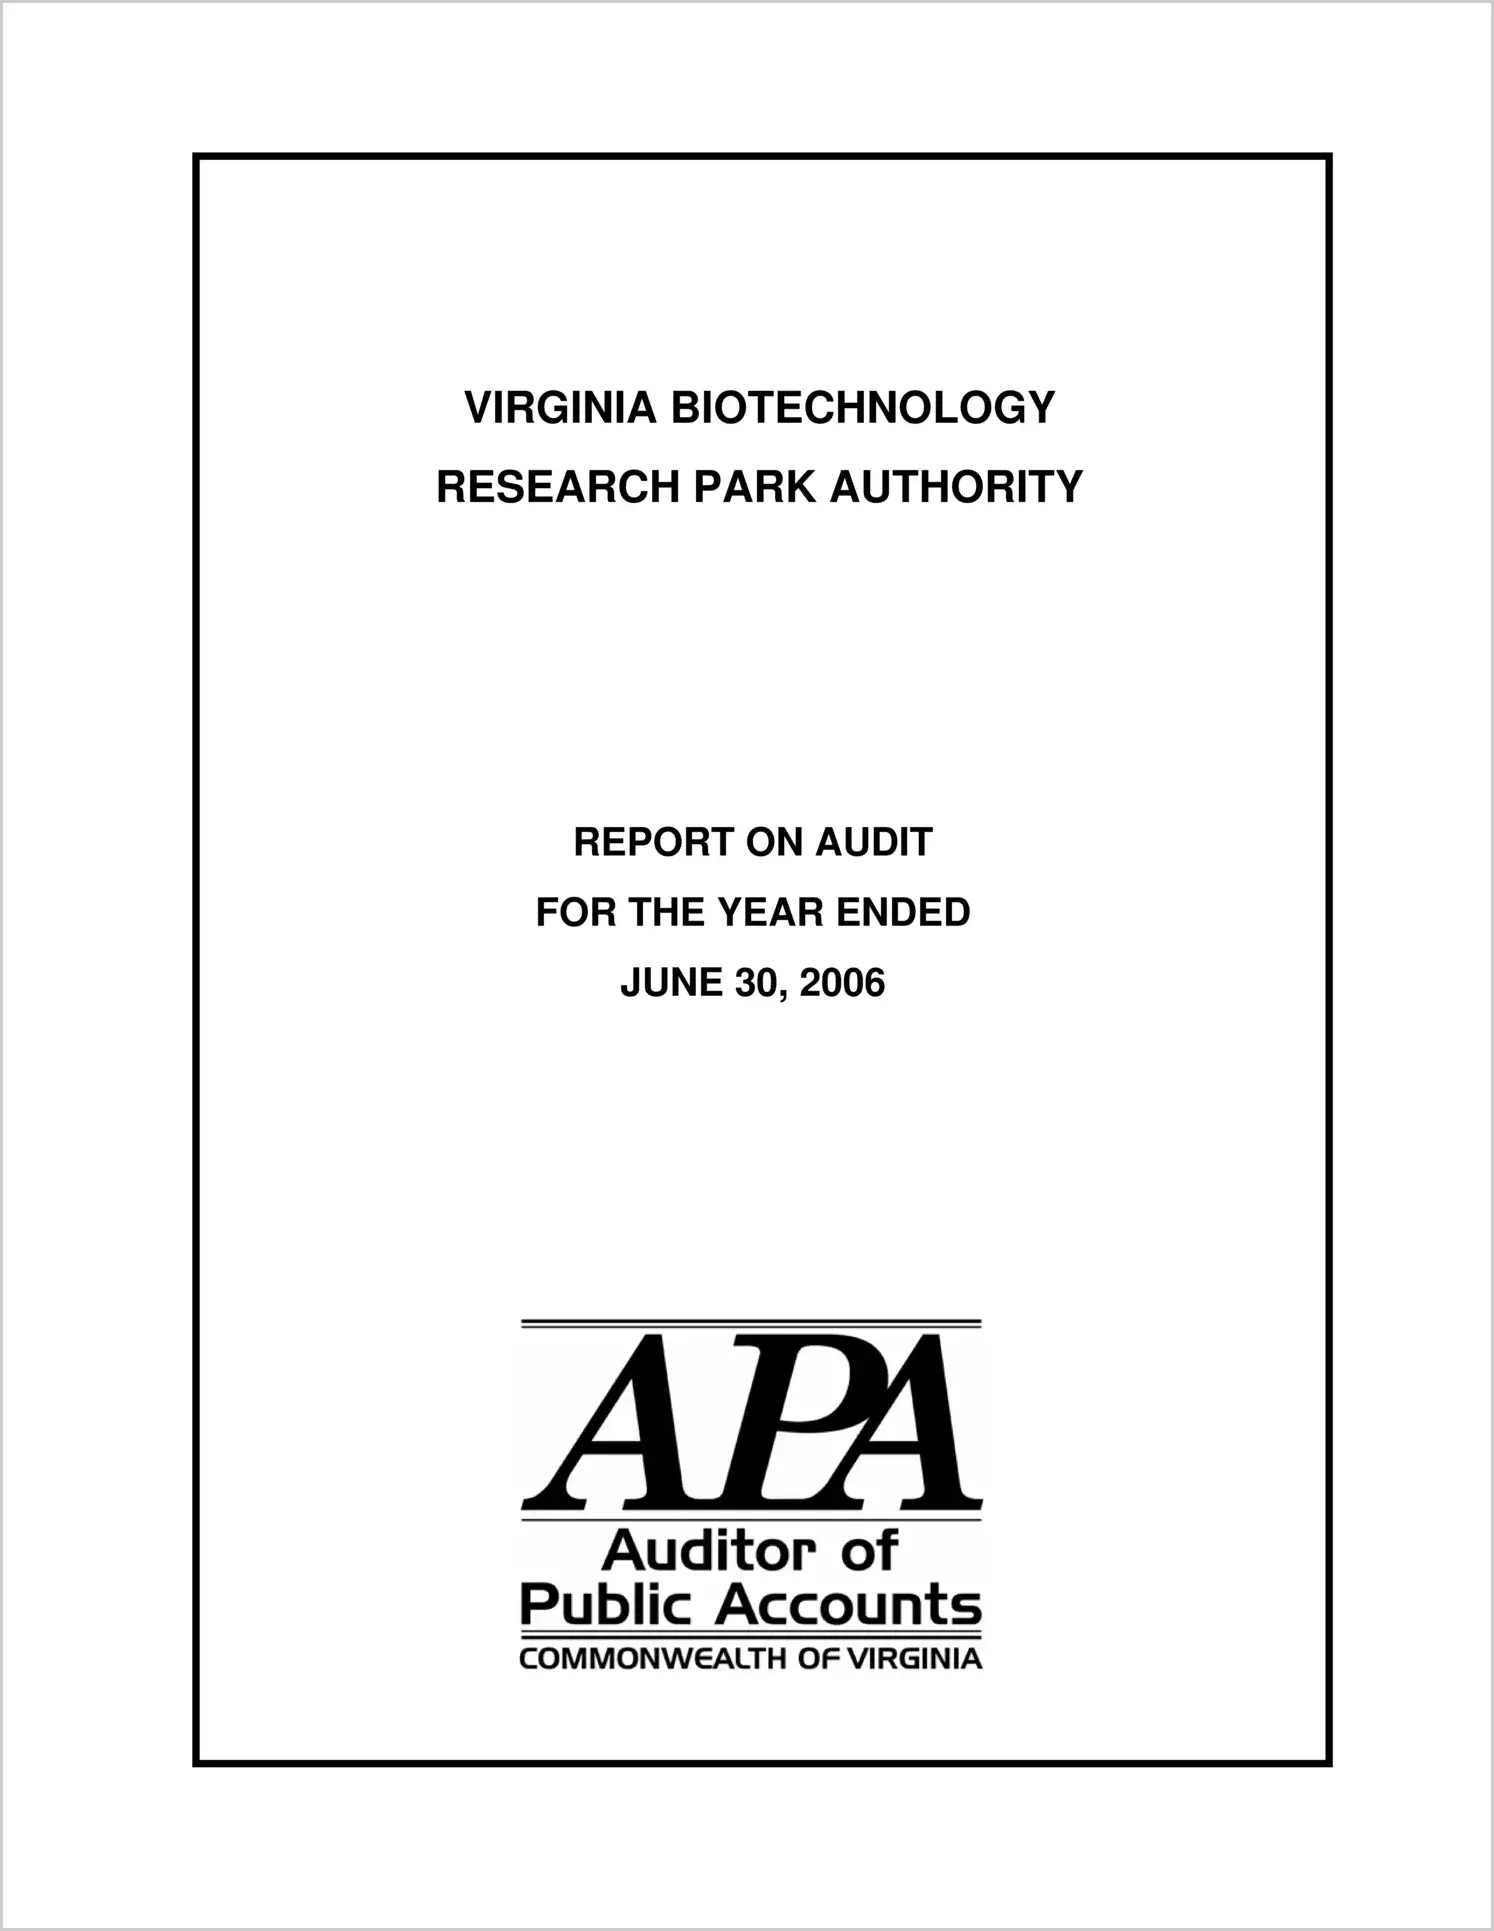 Virginia Biotechnology Research Park Authority for the year ended June 30, 2006